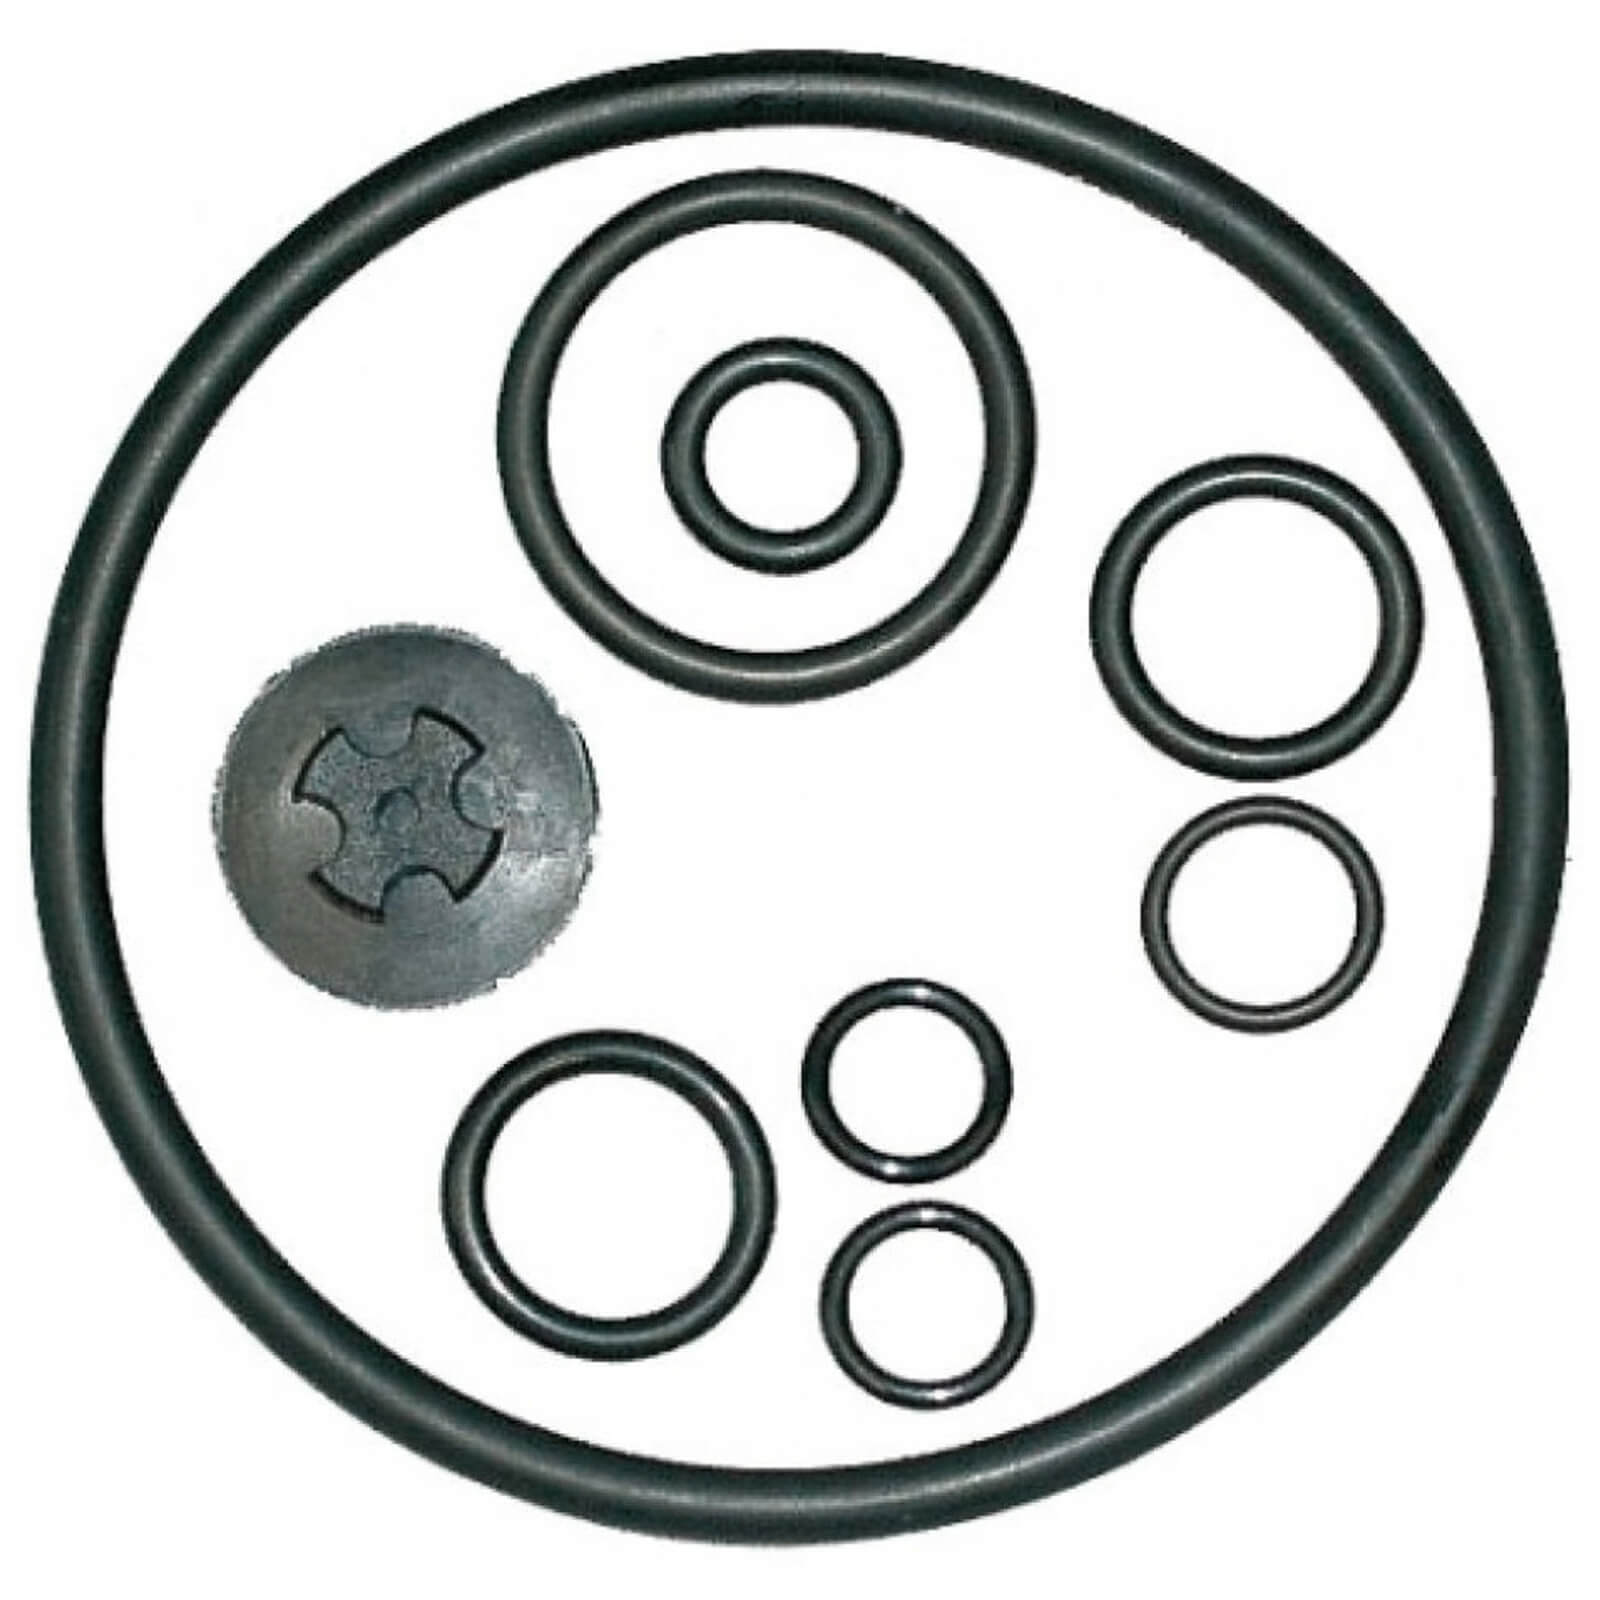 Image of Solo Gasket Kit for 456 and 457 Pressure Sprayers